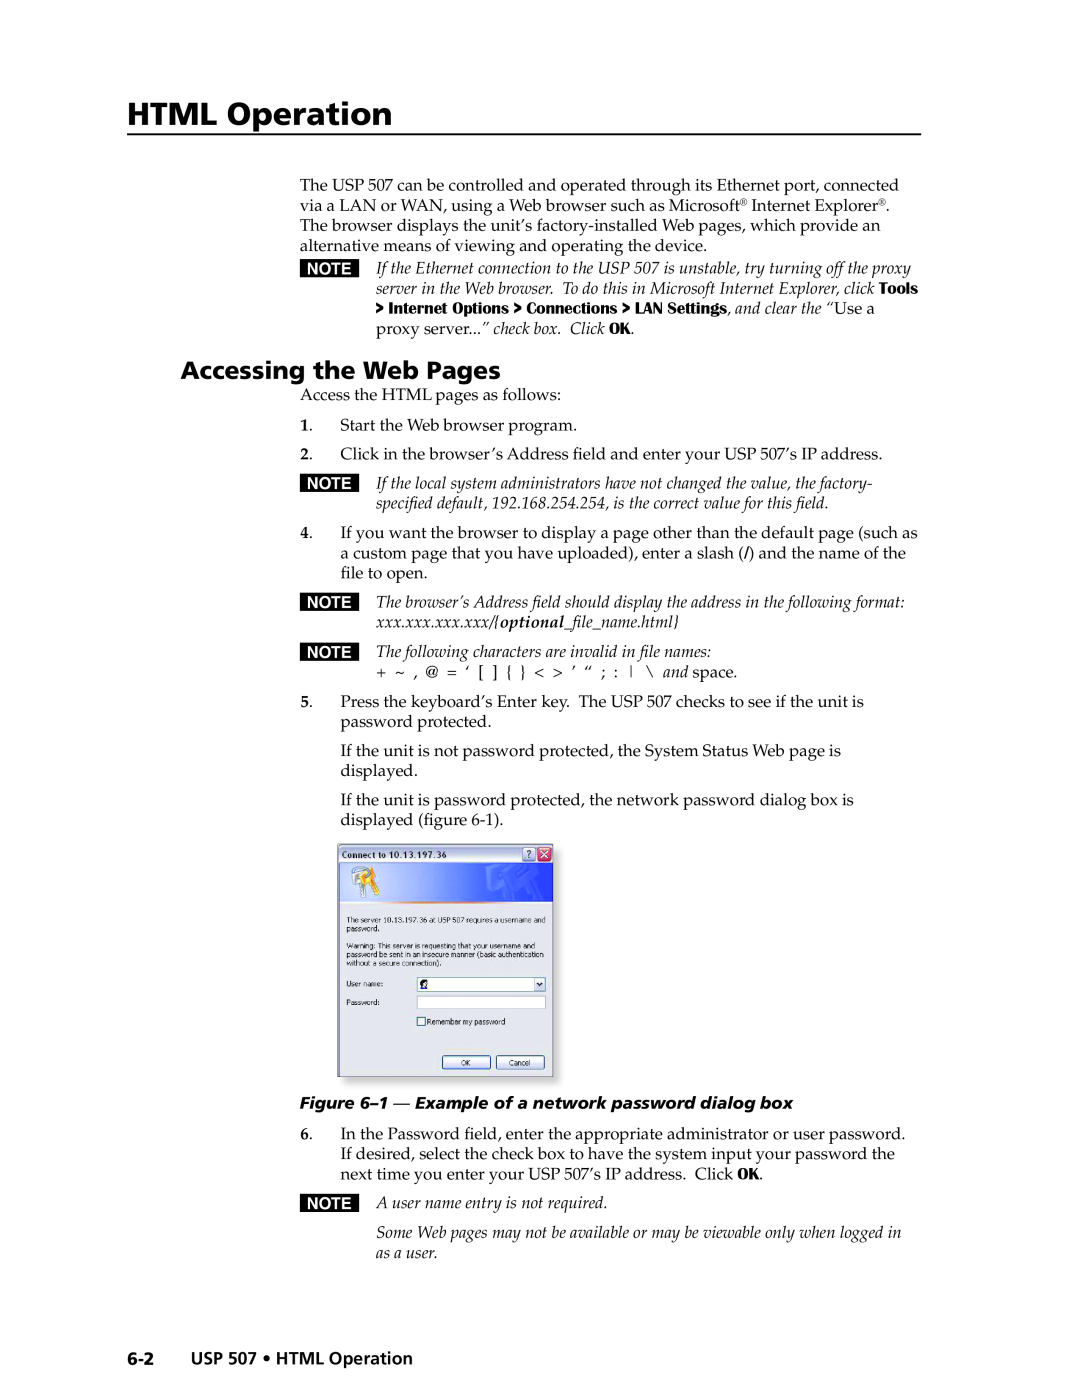 Extron electronic manual Accessing the Web Pages, 6-2USP 507 • HTML Operation 